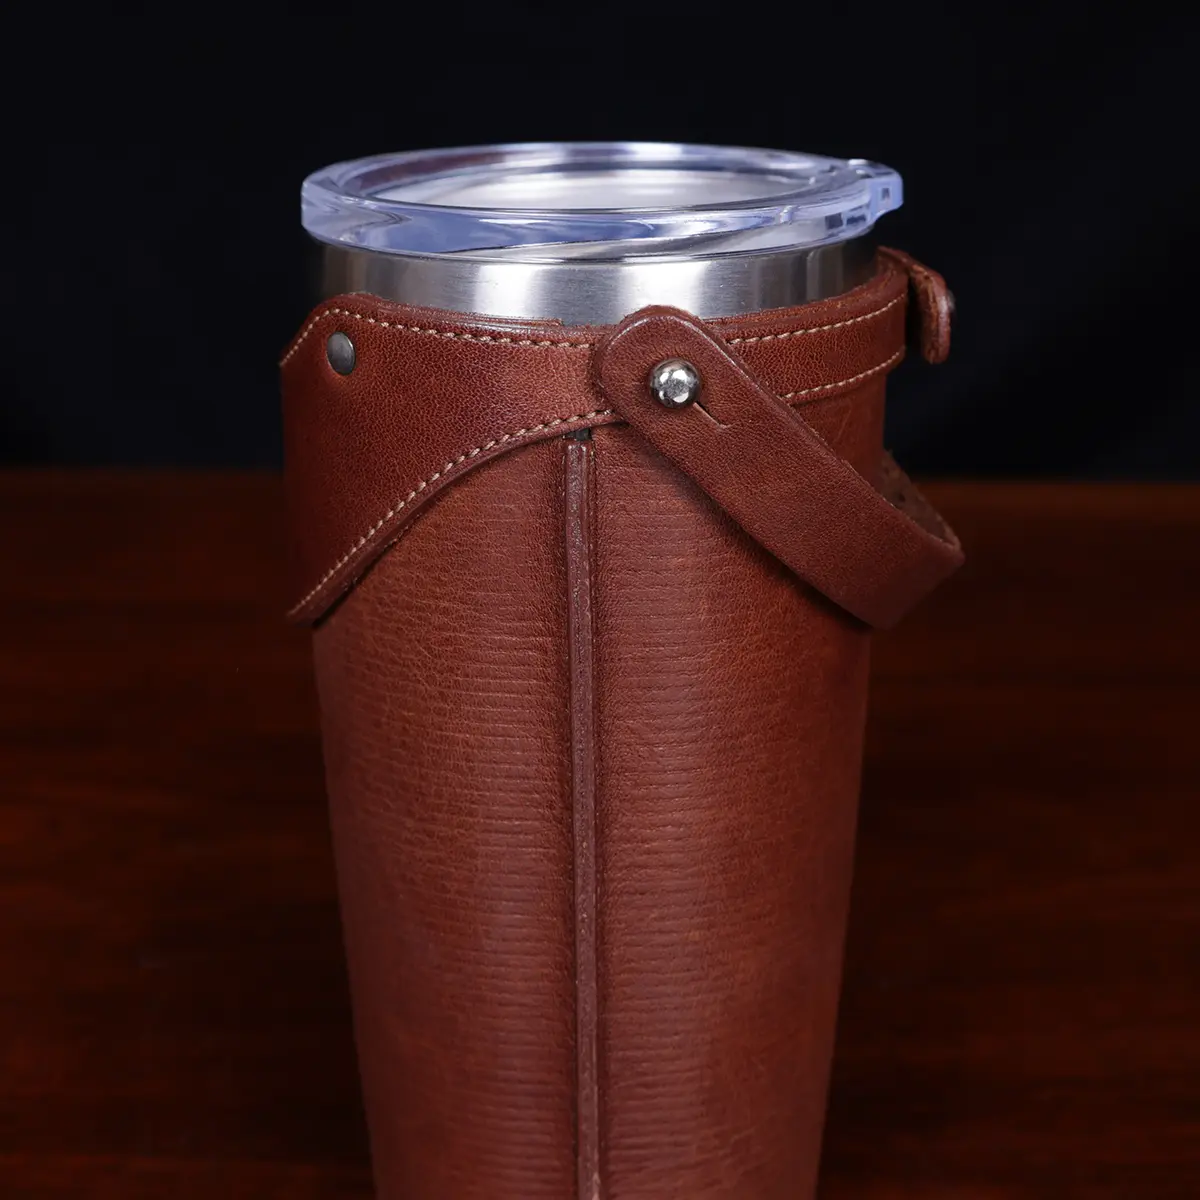 The side of the No 20 Leather Tumbler